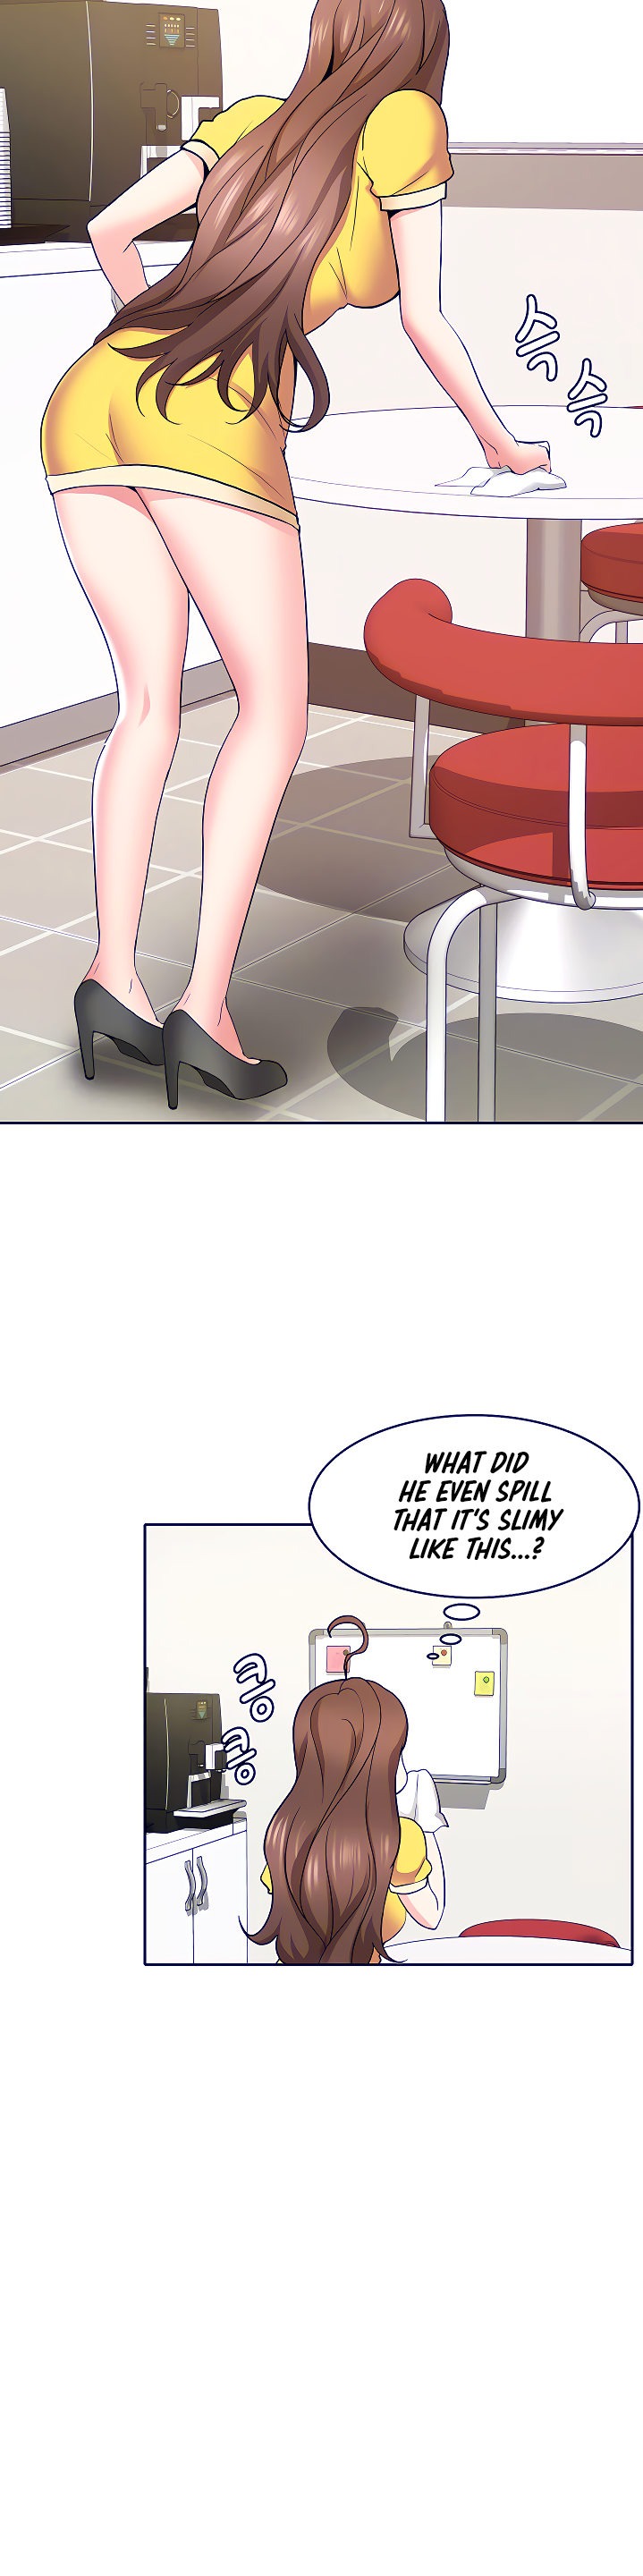 Need A Service? - Chapter 5 Page 5